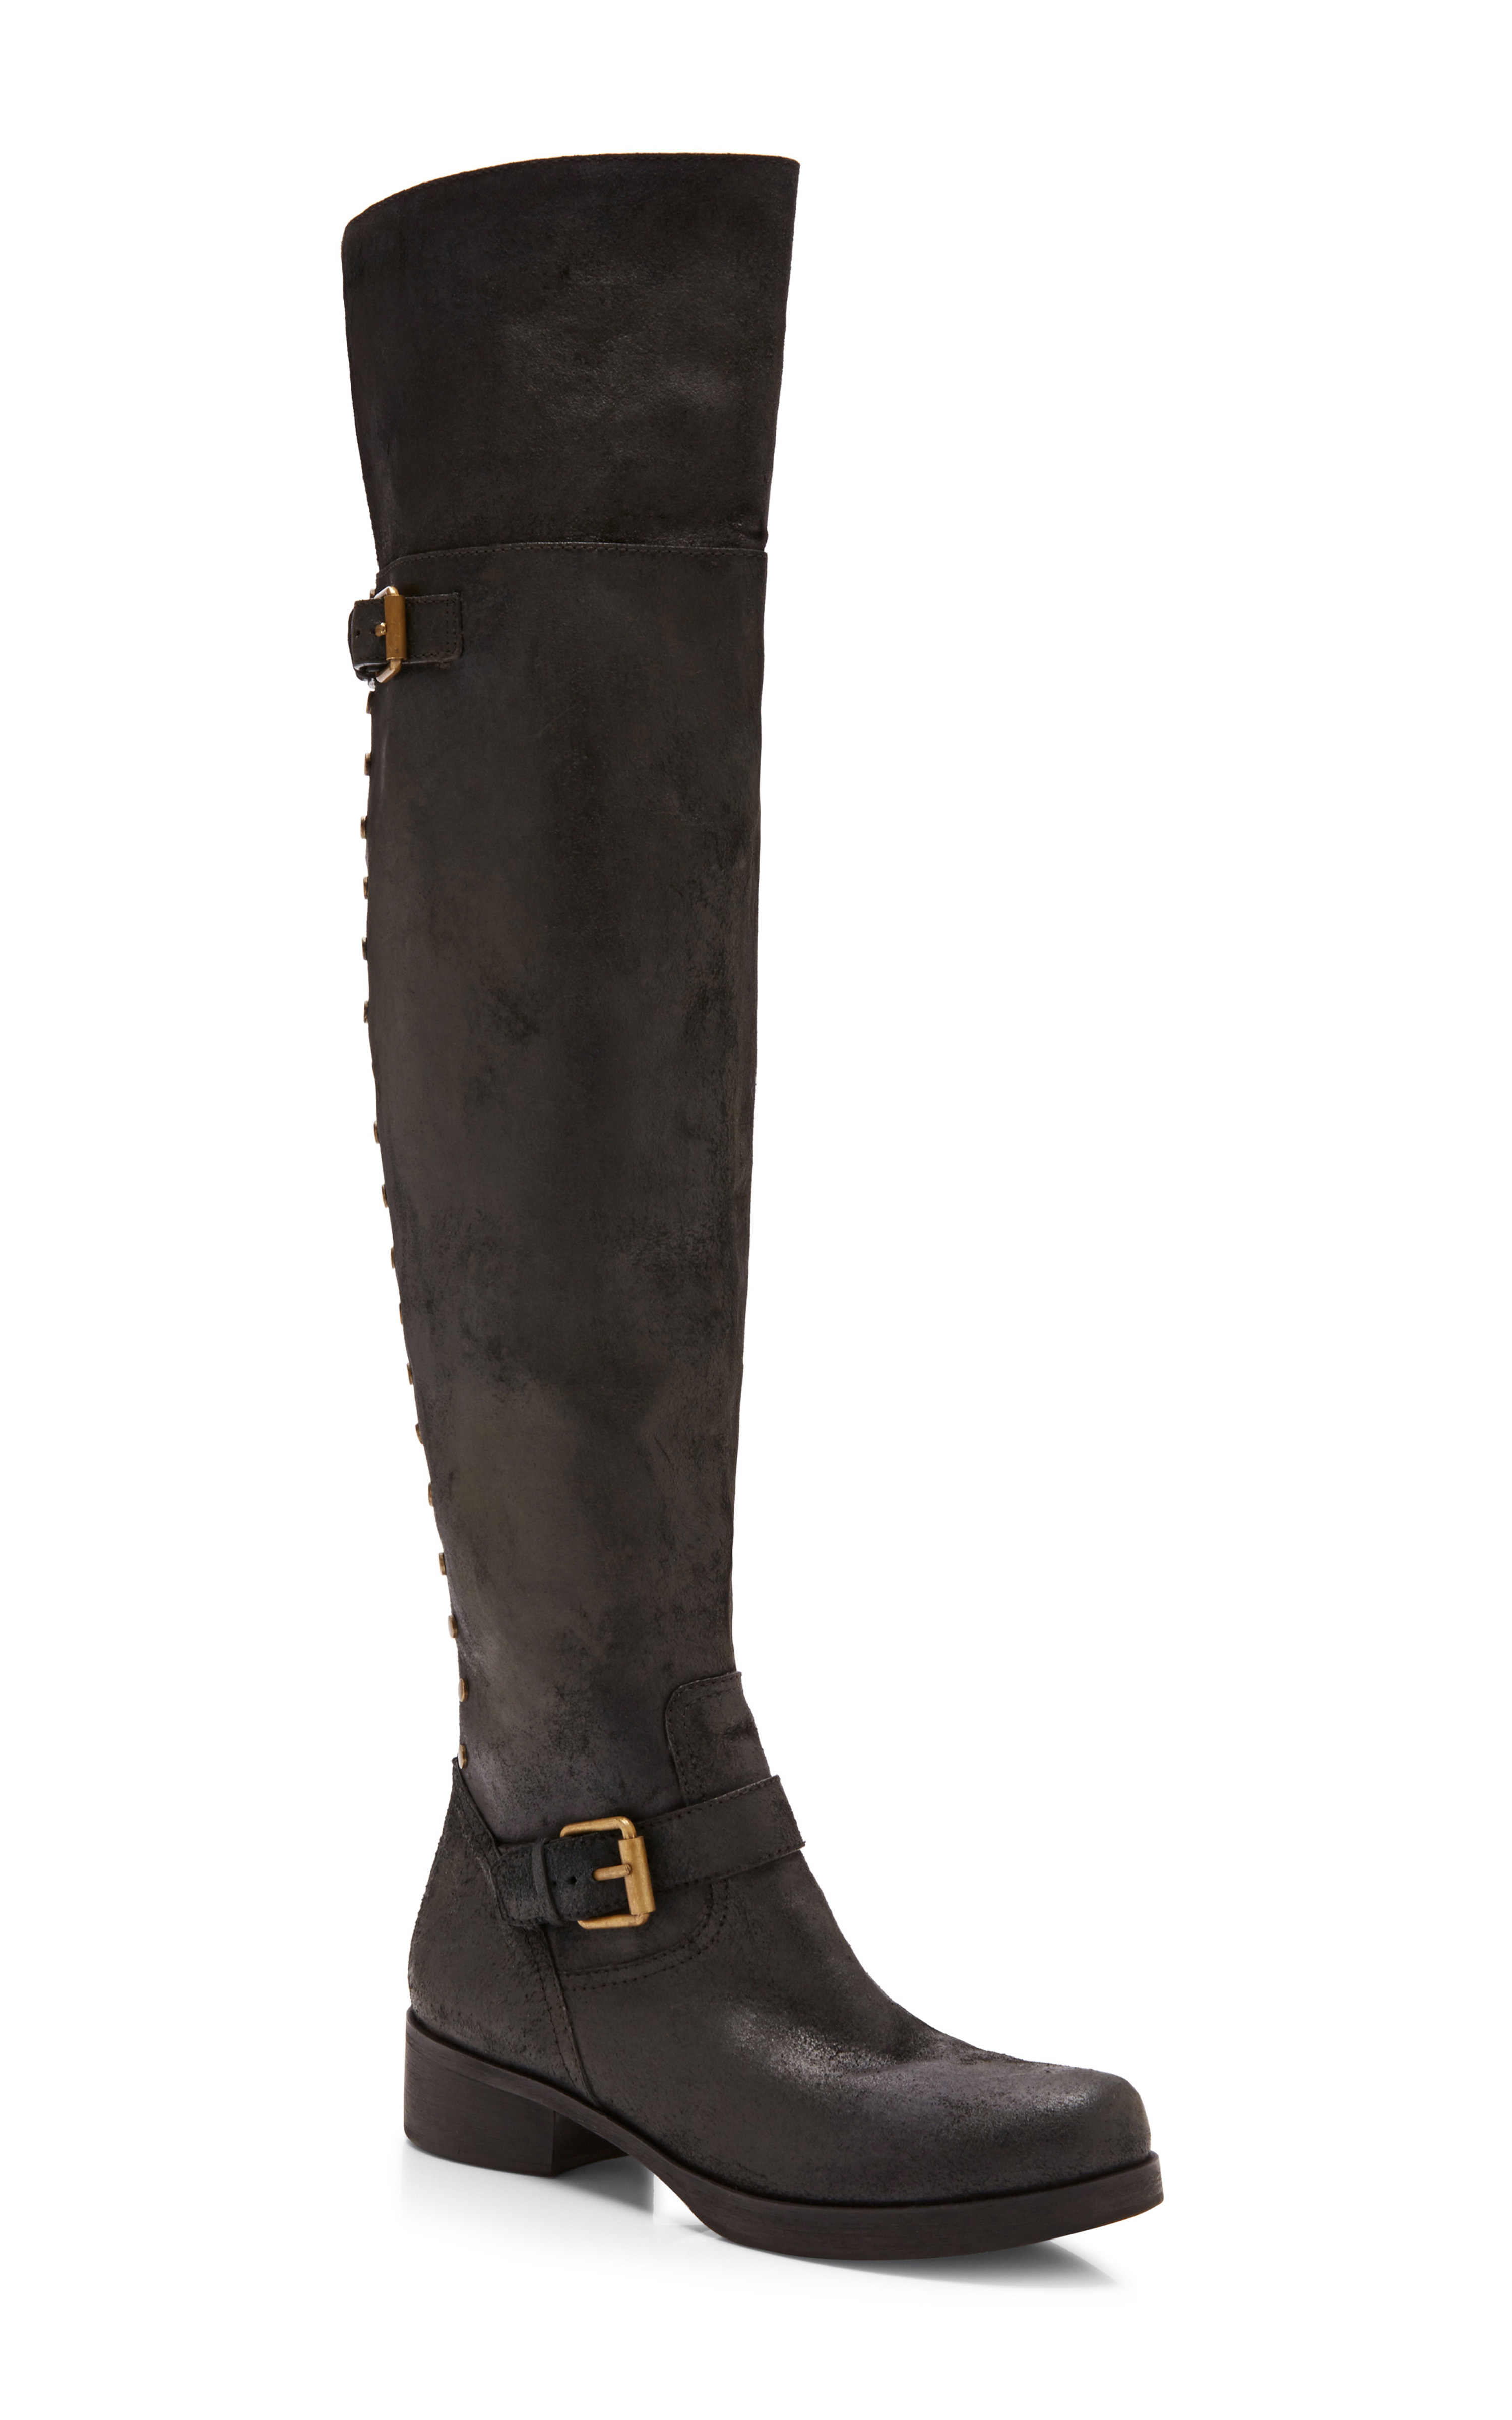 Lyst - Tory Burch Tarulli Over The Knee Boot in Black